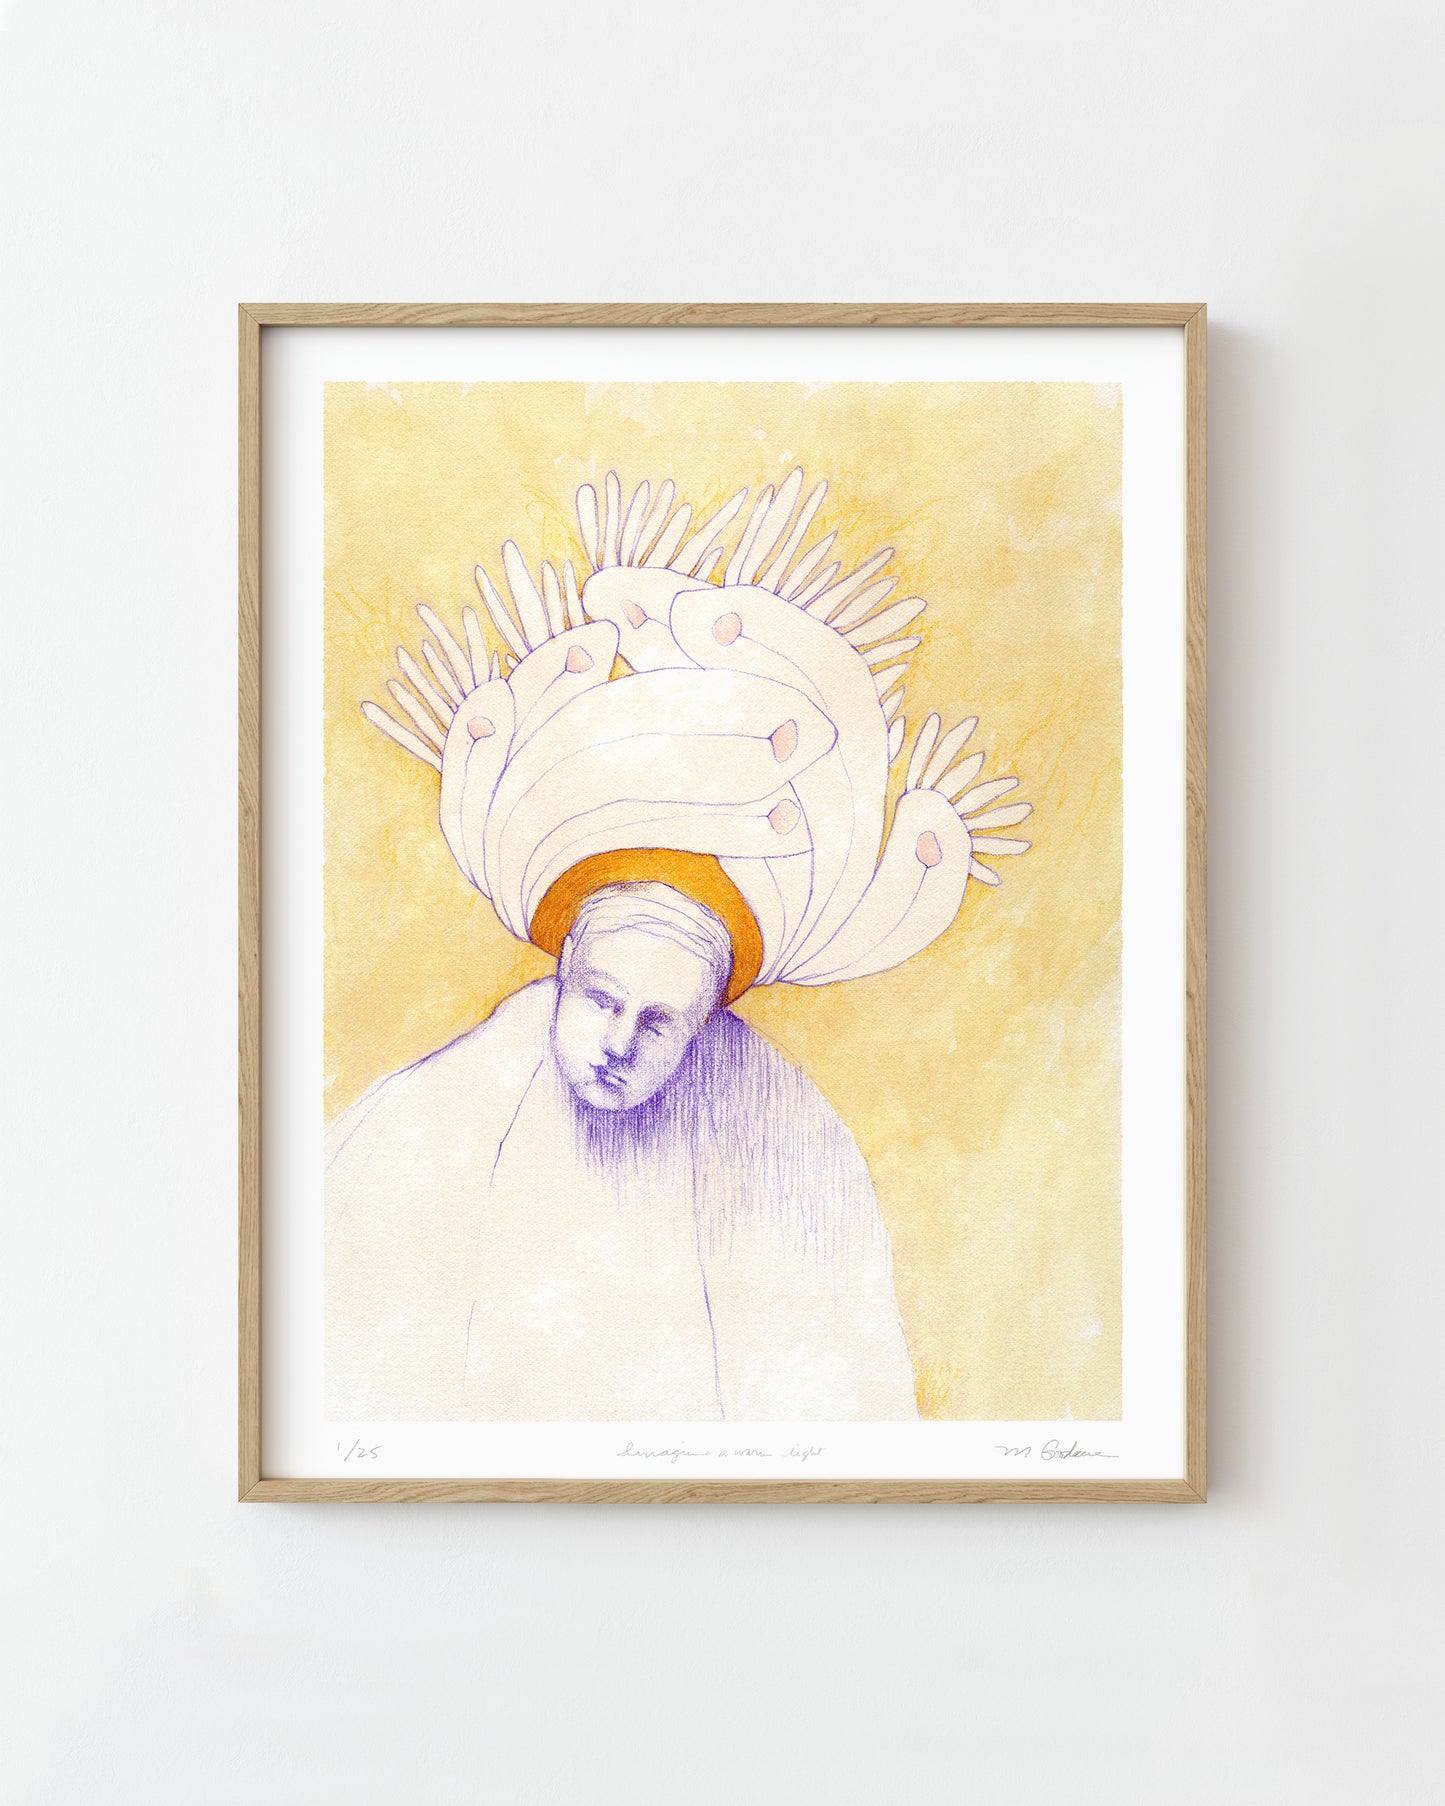 Framed semi-abstract drawing of a person with a large crown of abstract feathers.